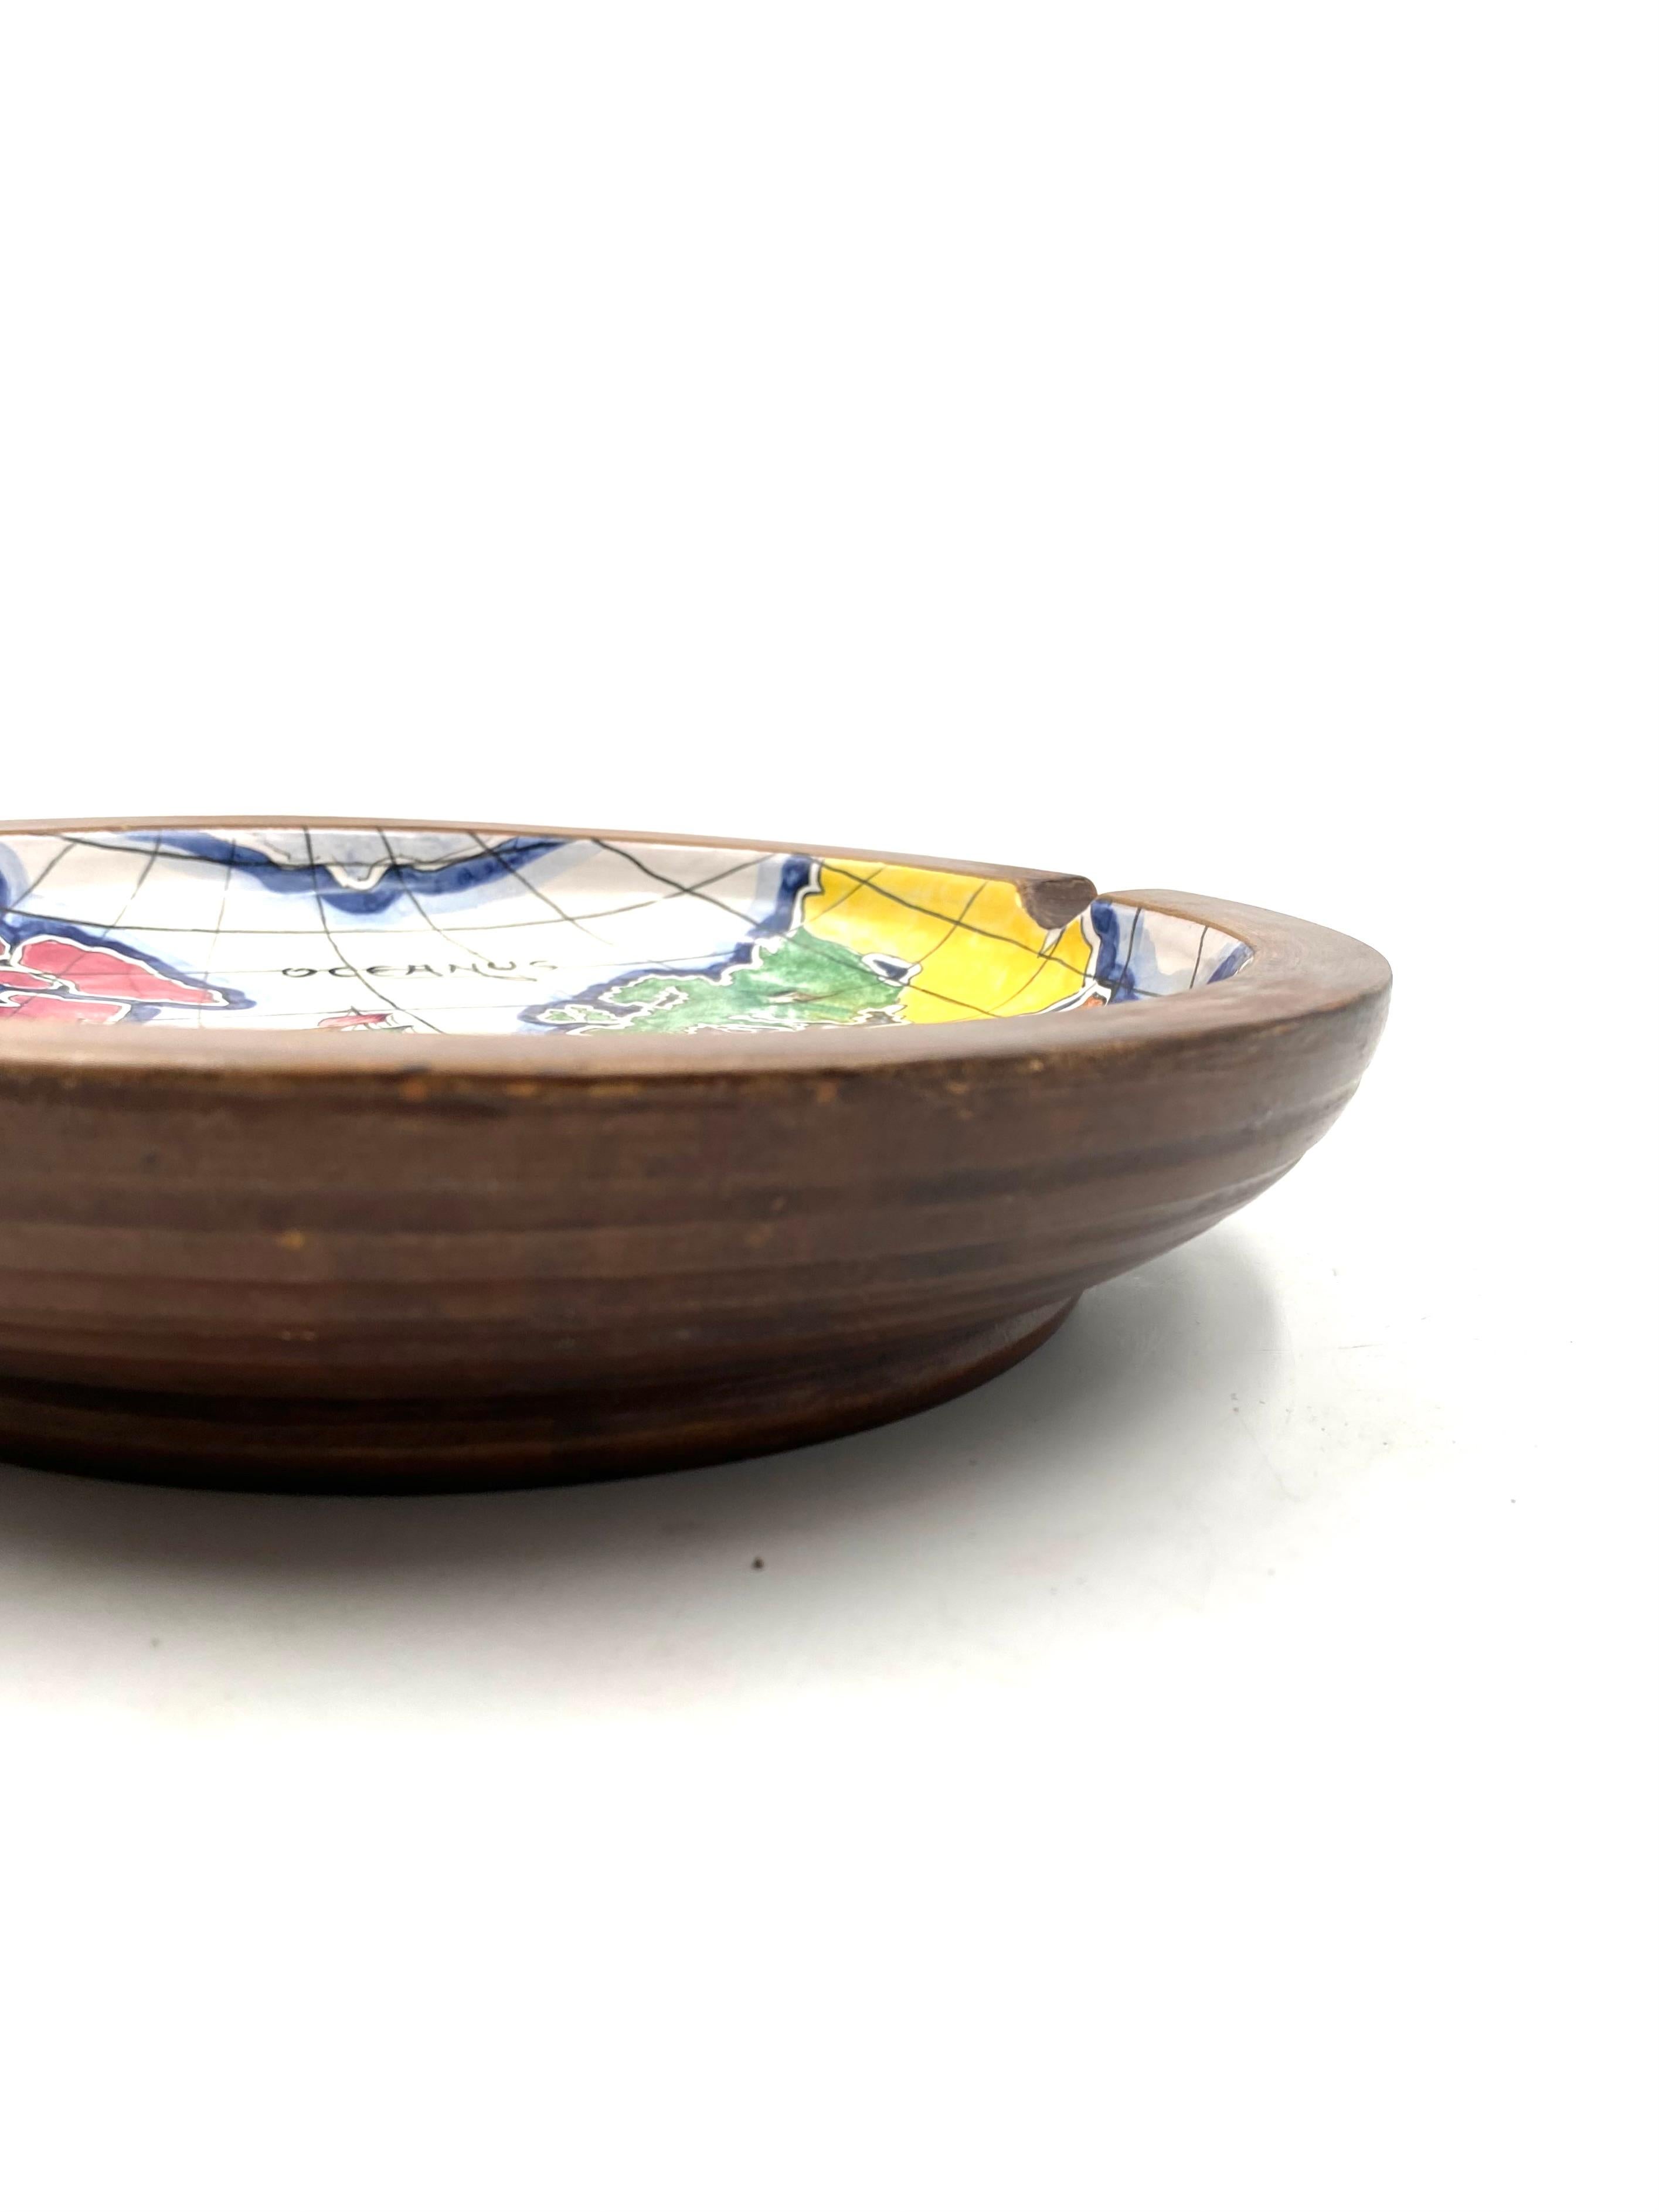 Polychrome Ceramic World Map Catchall / Ashtray, Zaccagnini, Italy, 1940s In Excellent Condition For Sale In Firenze, IT